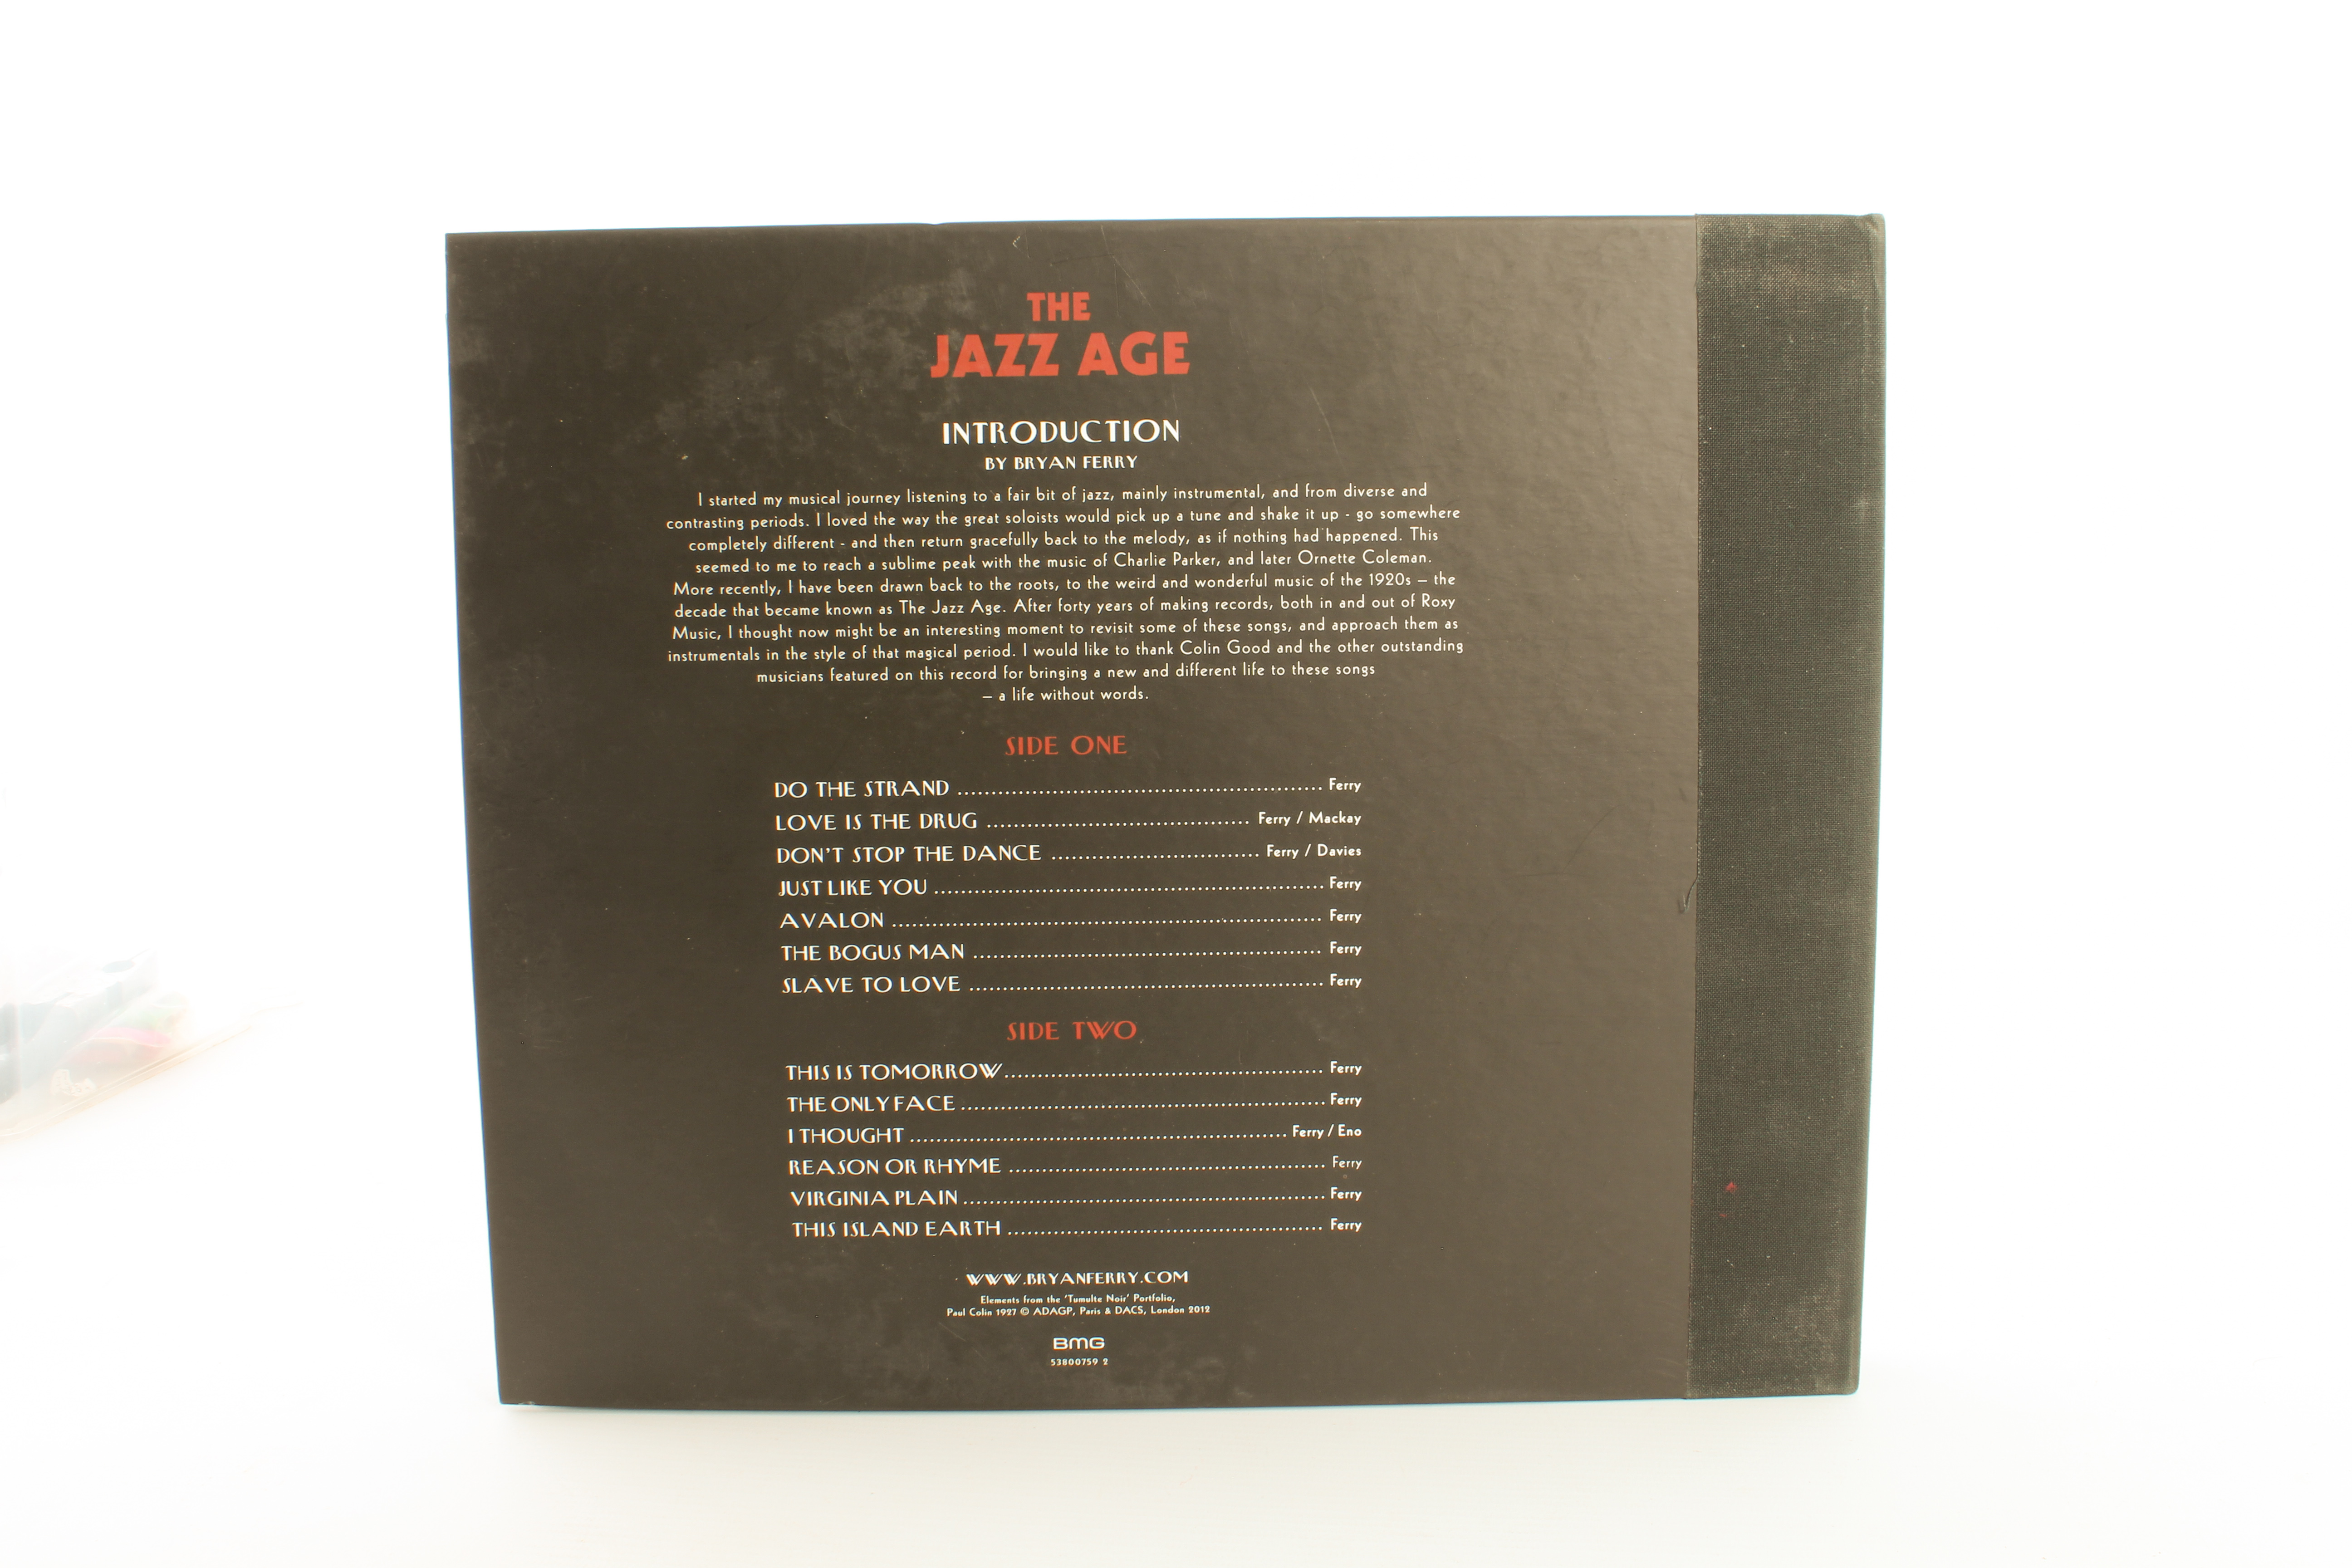 The Bryan Ferry Orchestra – The Jazz Age. Original 2012 limited edition 6 x 10” album, 500 copies - Image 3 of 10